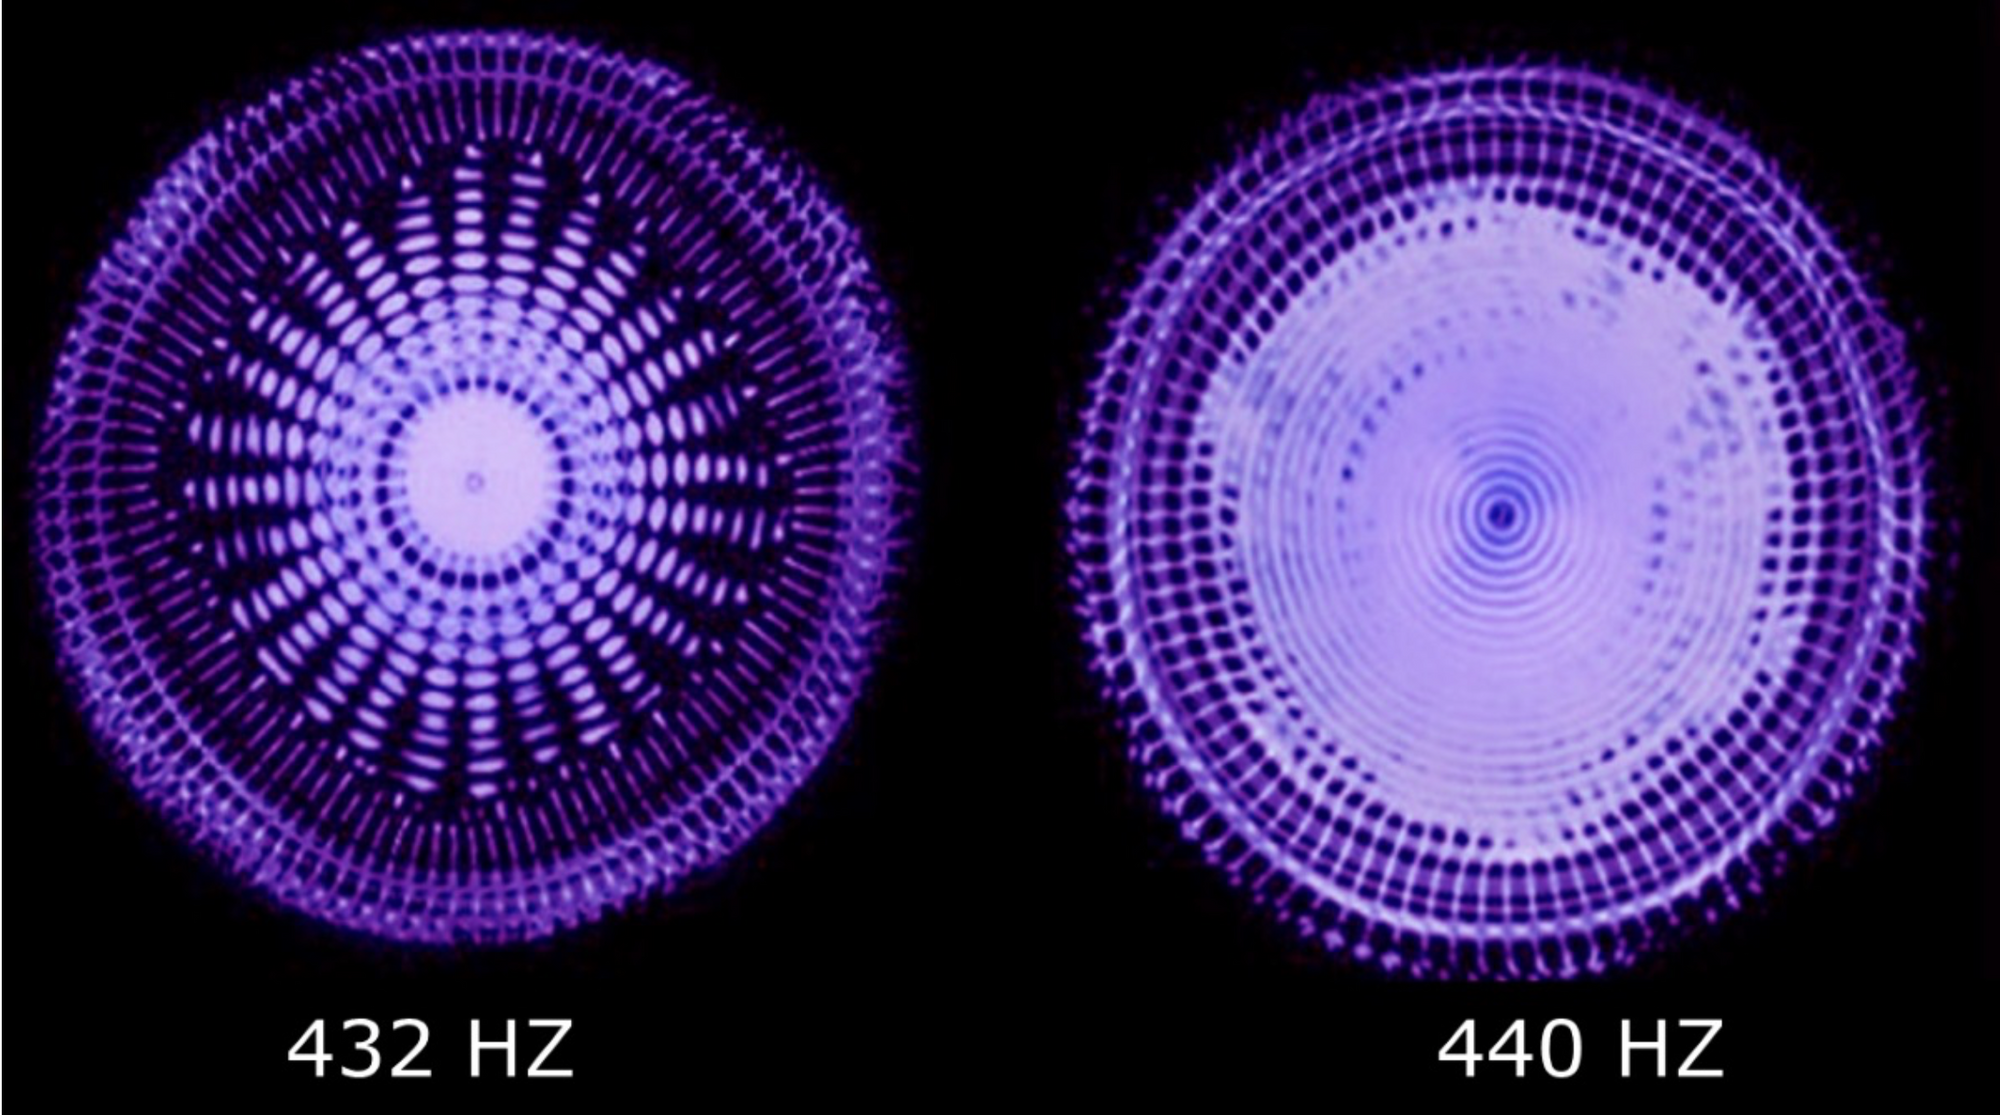 A diagram shows how 432Hz looks like a beautiful, radiating sun, while 440Hz looks like a blob.